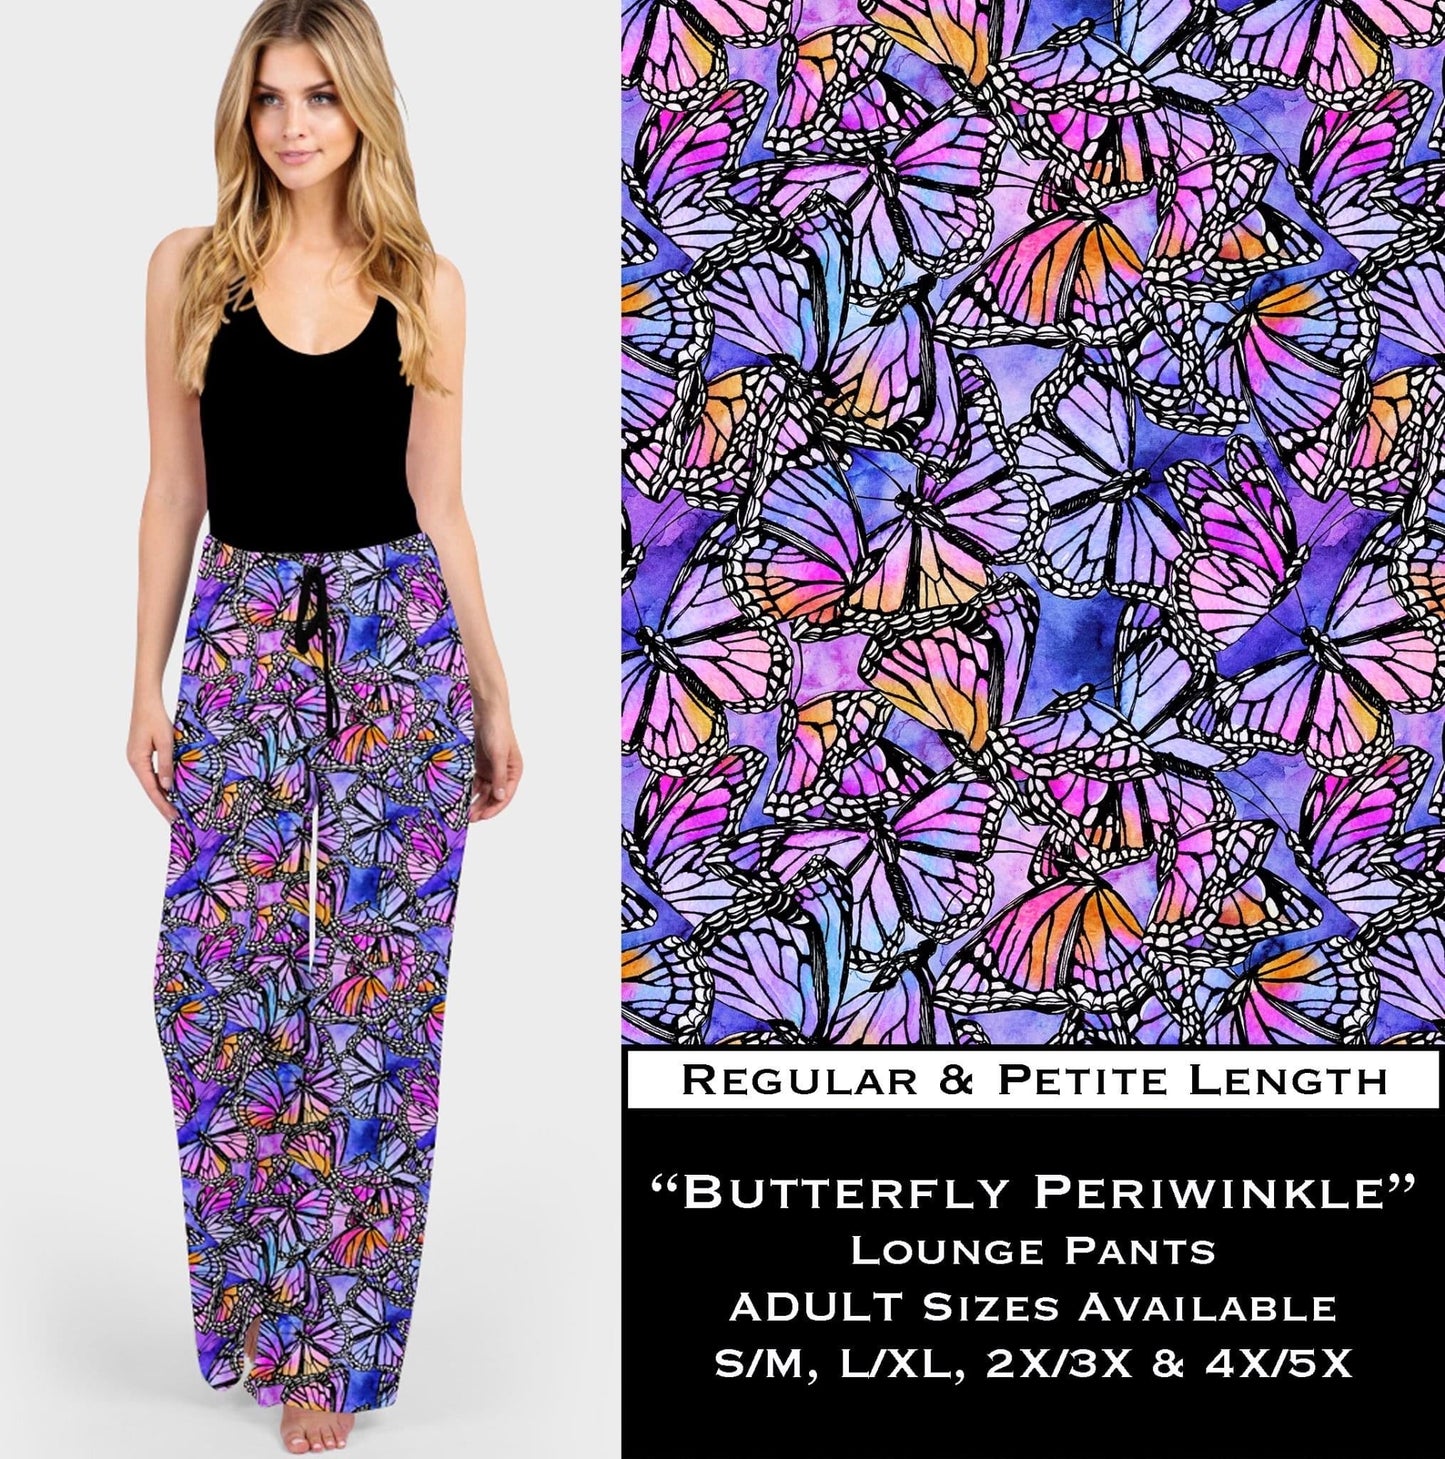 Butterfly Periwinkle Lounge Pants